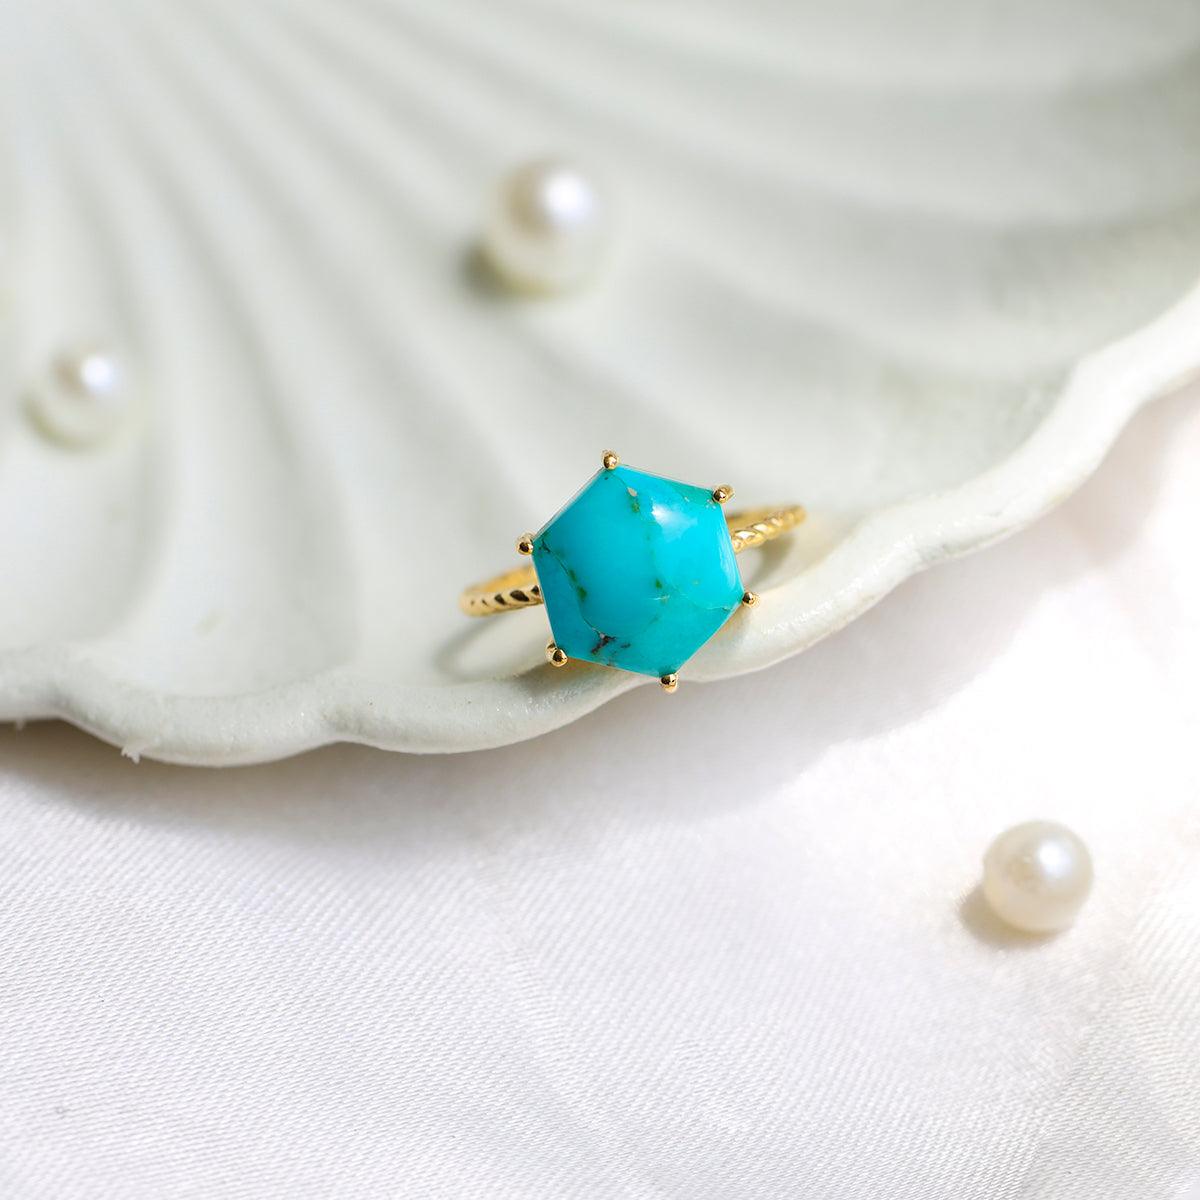 Blue Mohave Turquoise Solitaire Ring 14k Gold Over 925 Silver - YoTreasure